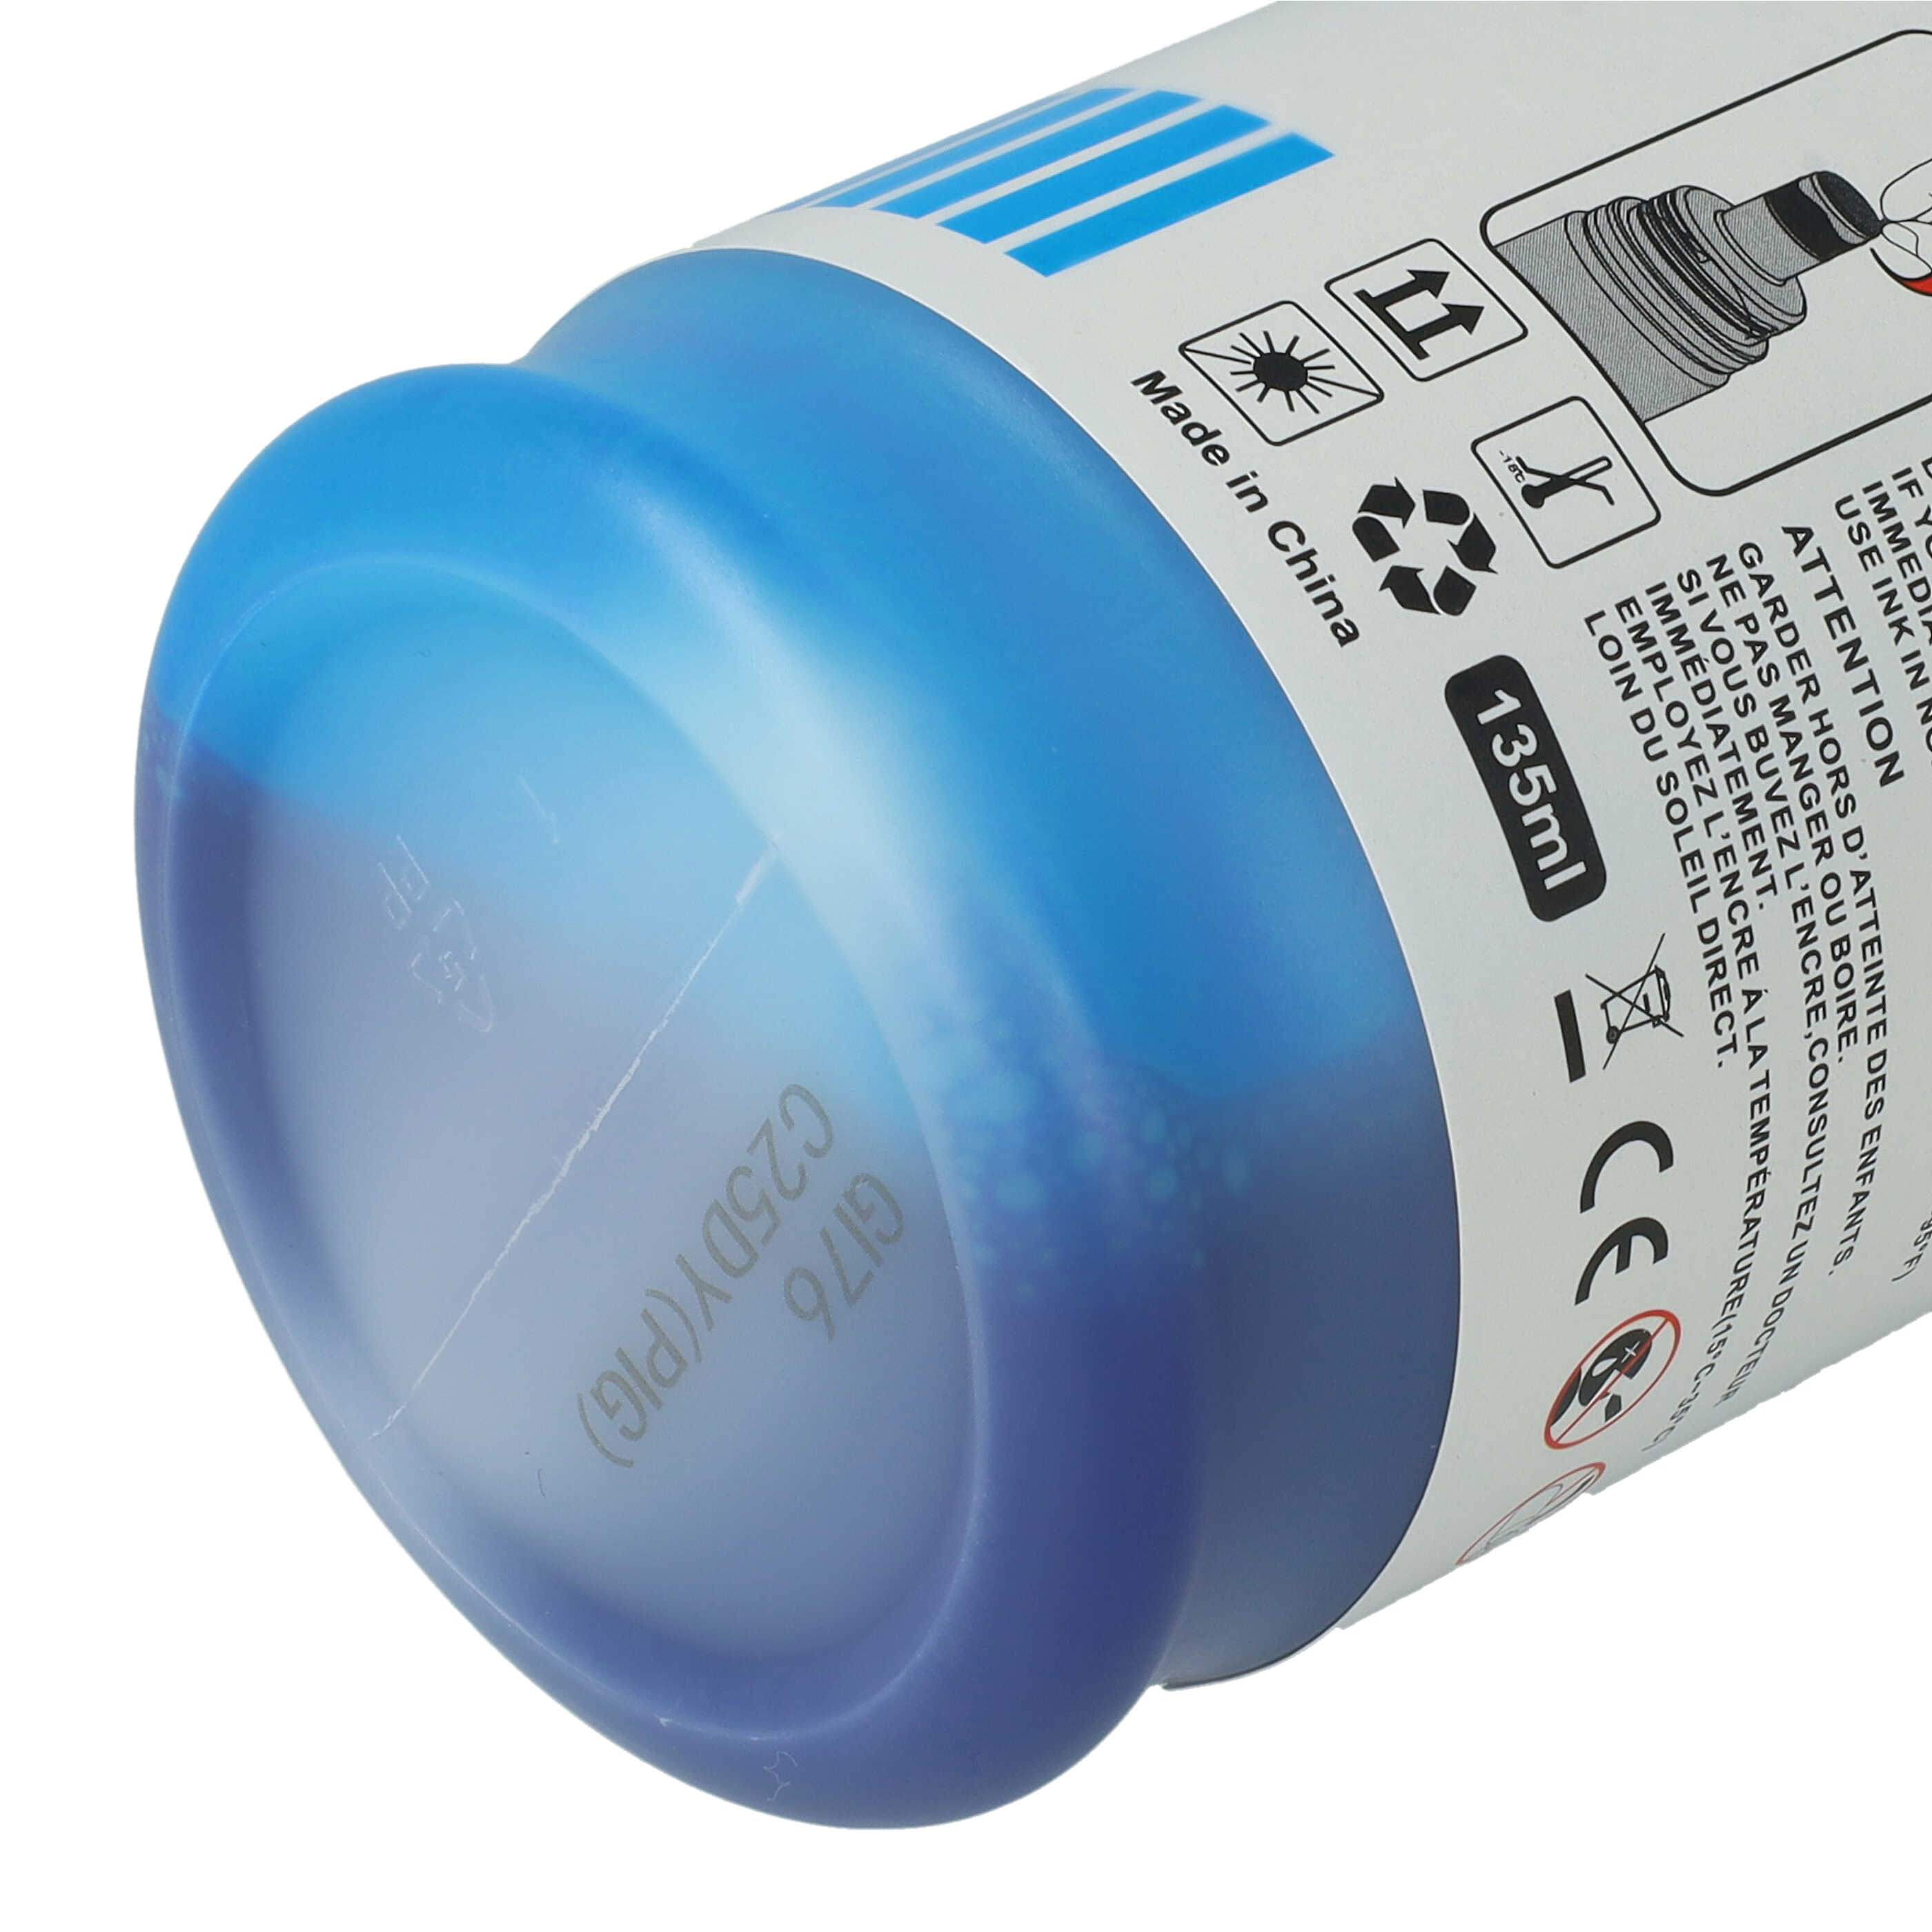 Refill Ink Cyan replaces Canon GI-56C, 4430C001 for Canon Printer - Pigmented, 135 ml